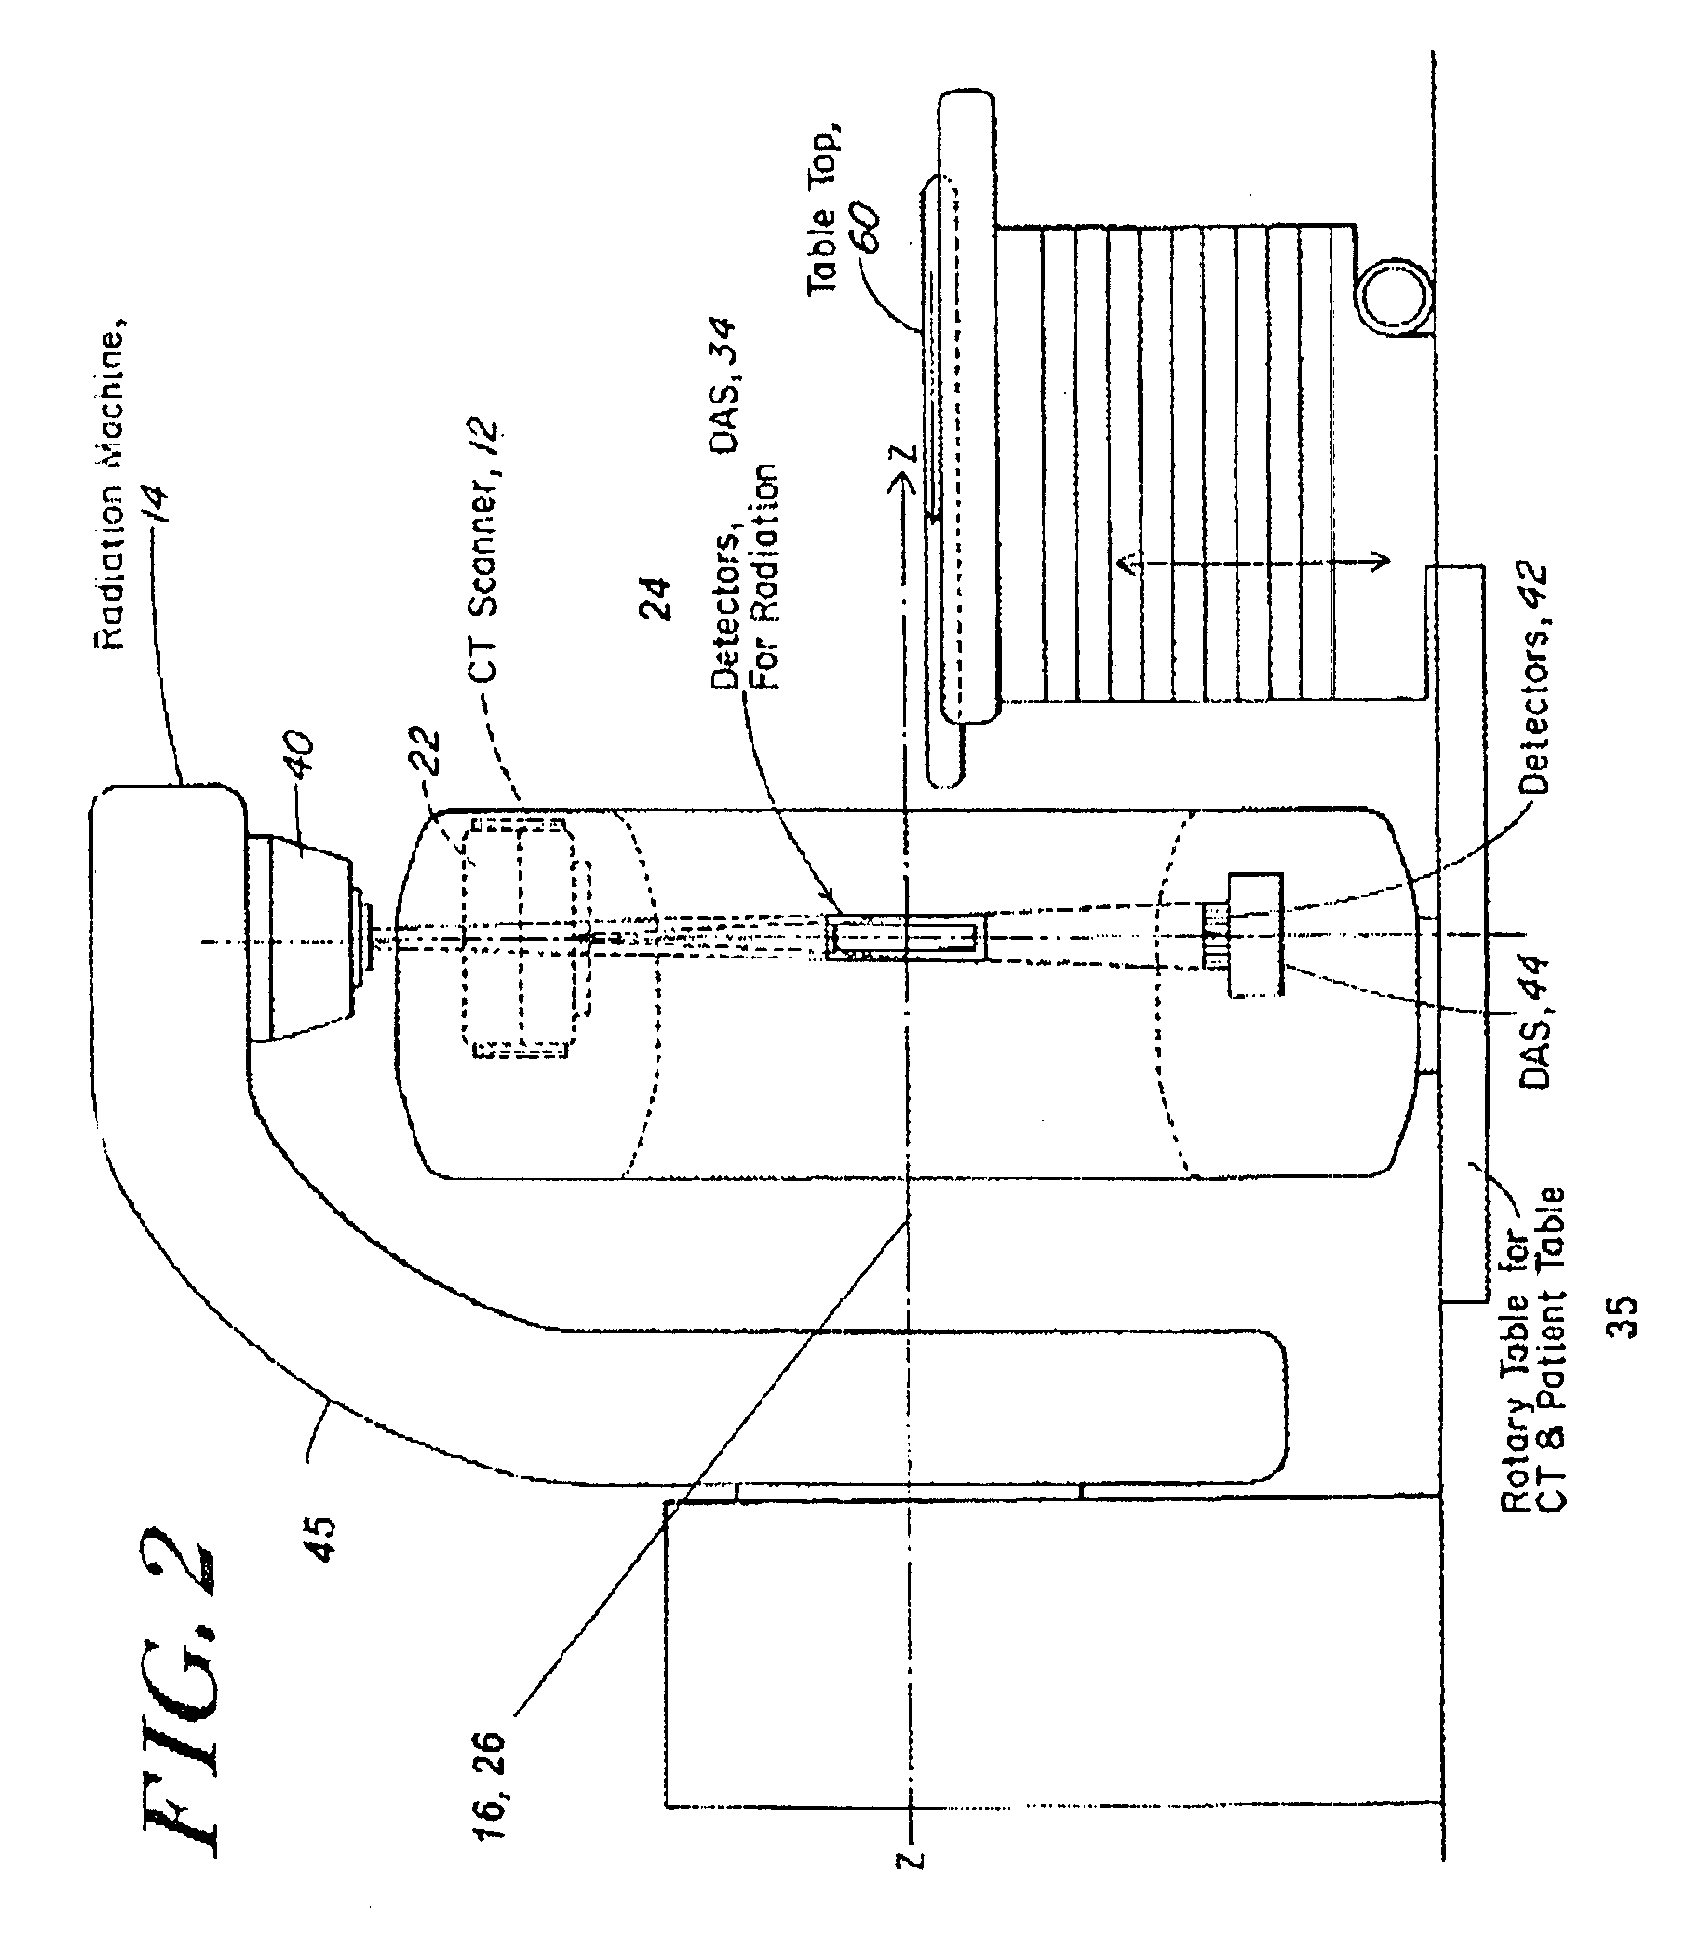 Combined radiation therapy and imaging system and method